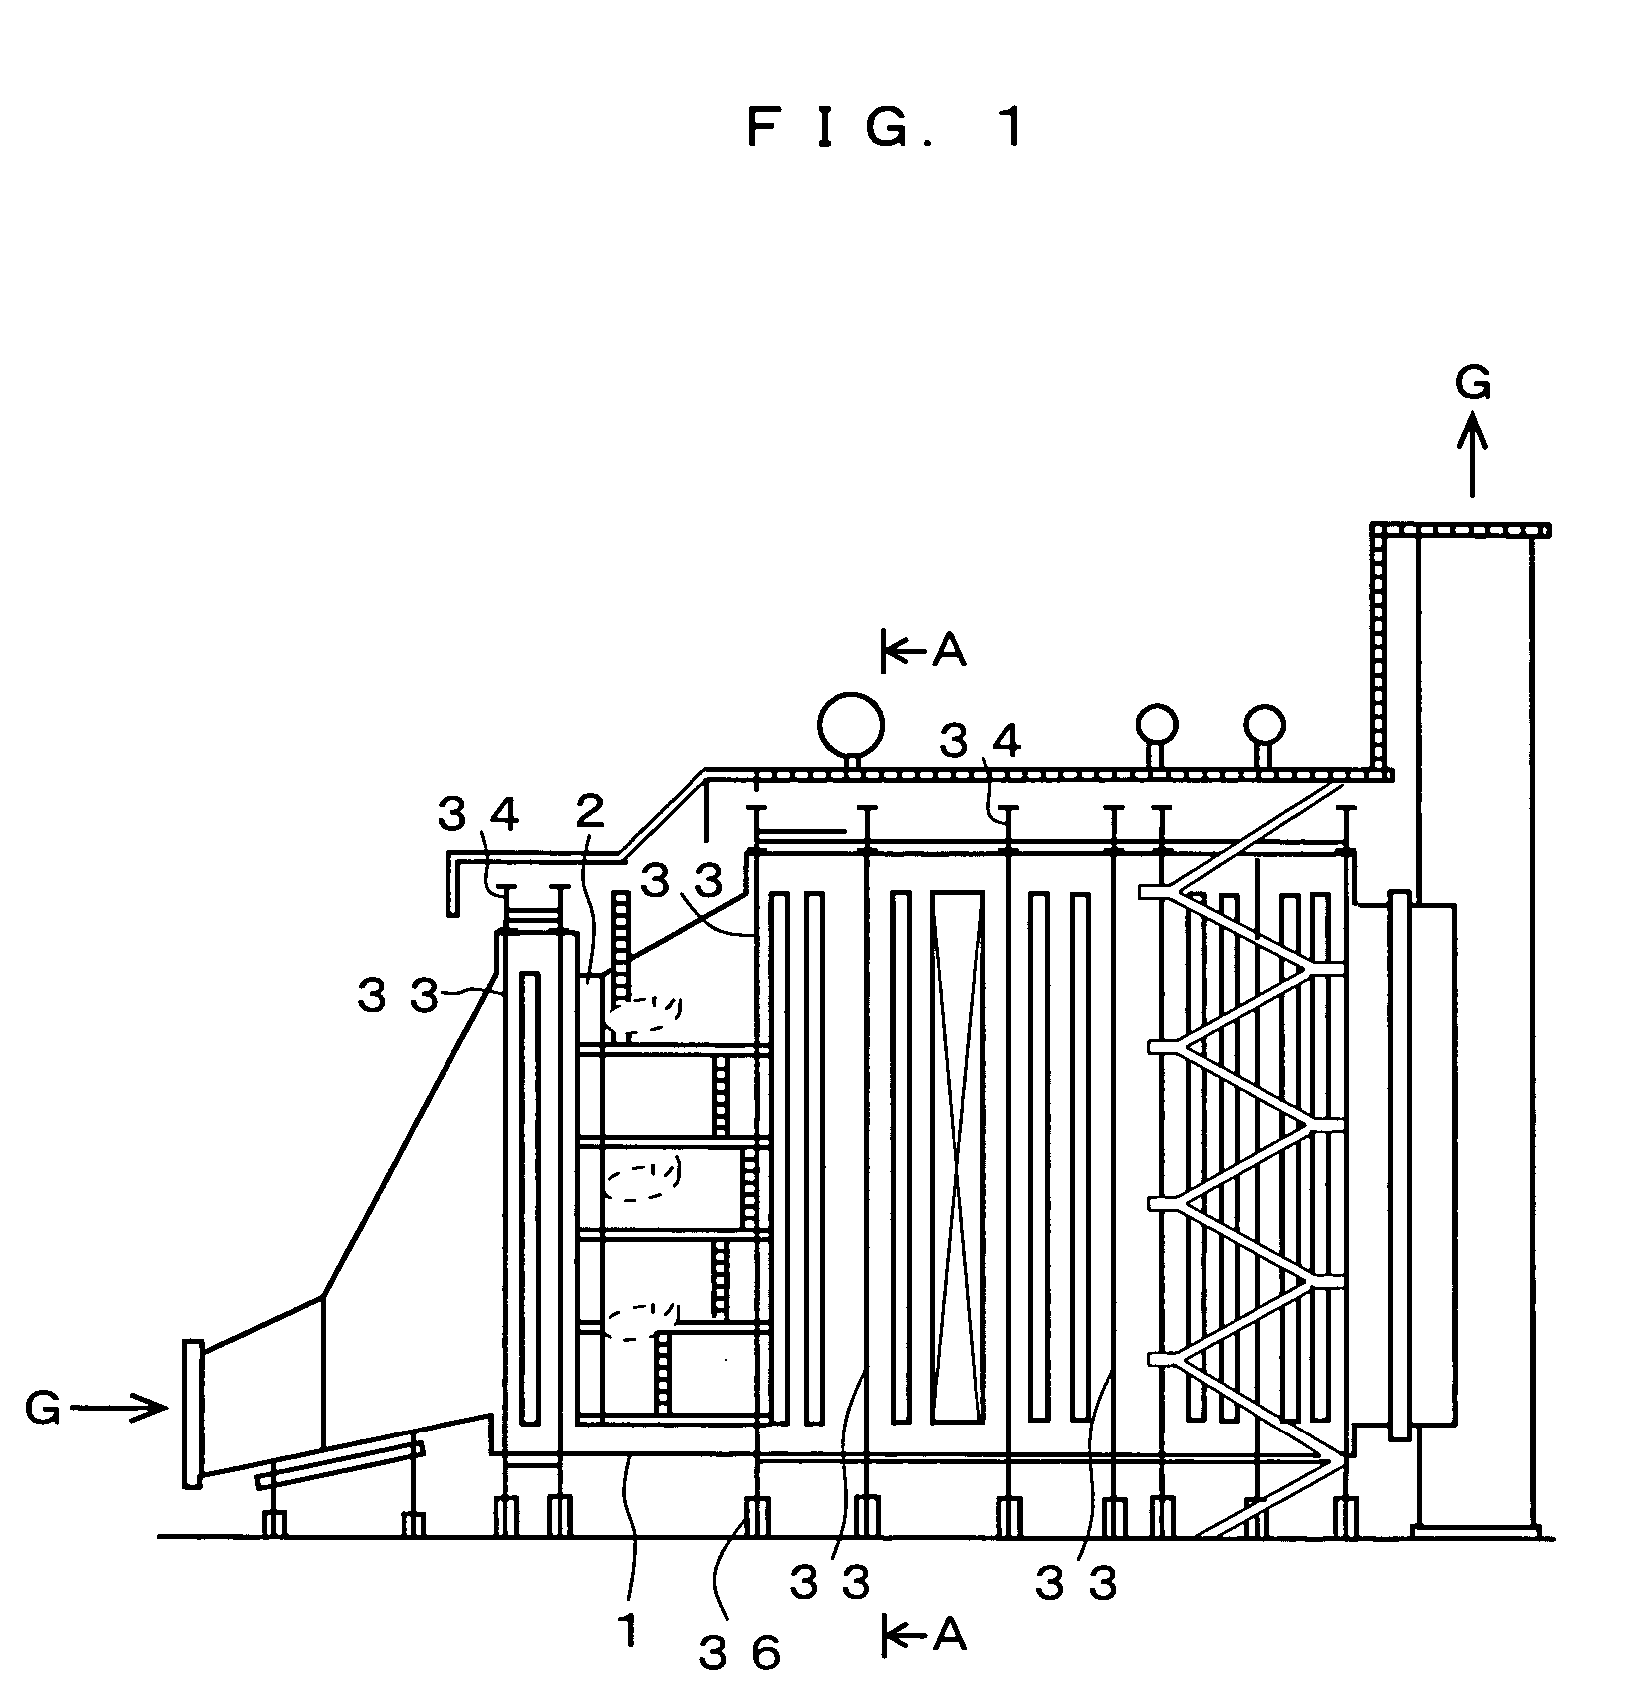 Heat transfer tube panel module and method of constructing exhaust heat recovery boiler using the module